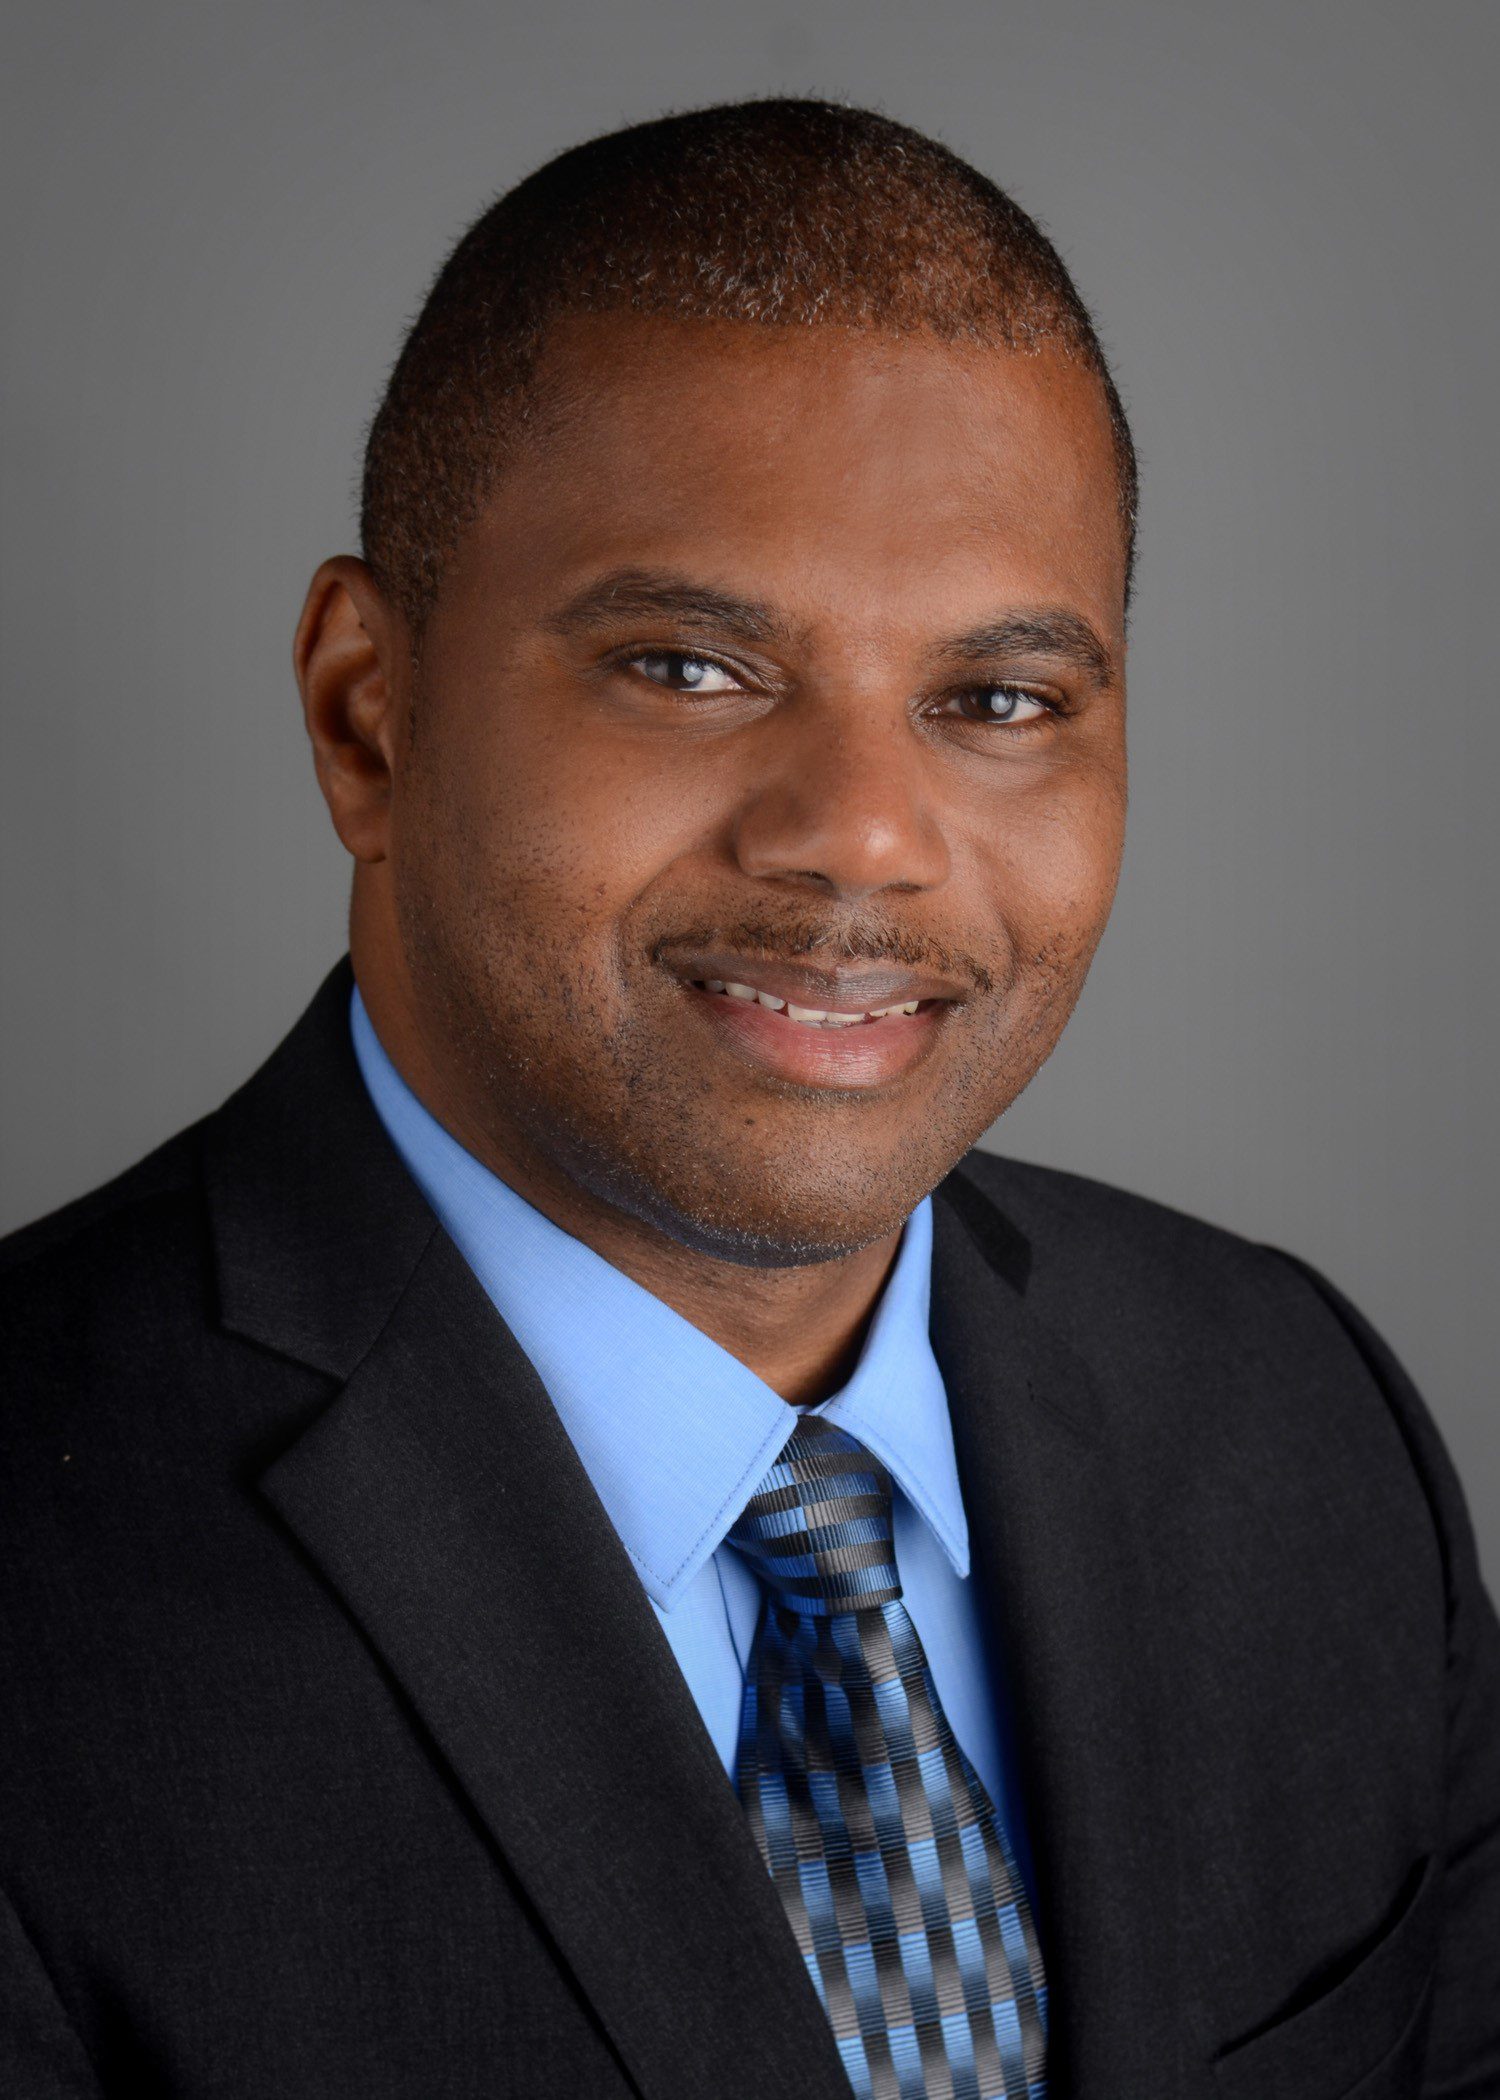 LRADAC Welcomes Eric D. Eaddy as Vice President of Administration